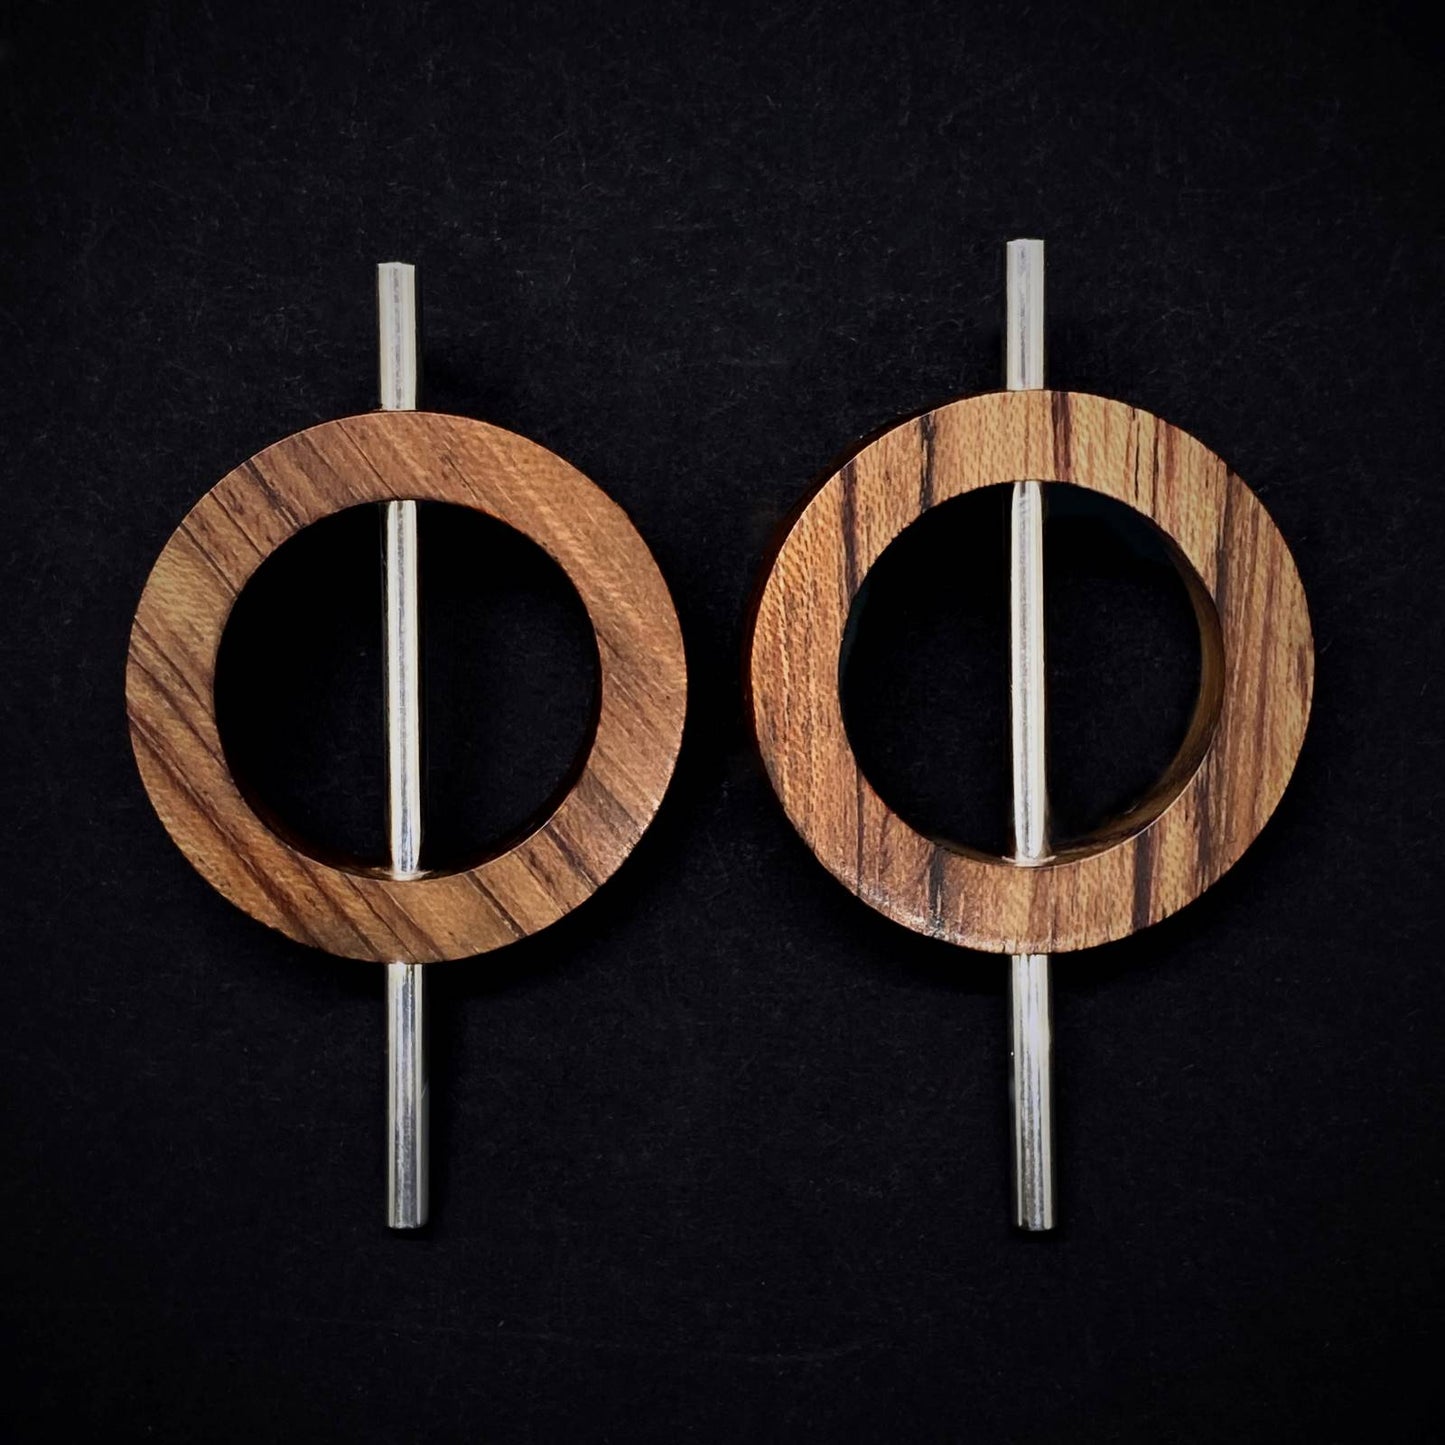 Load image into Gallery viewer, Statement earrings by Silverwood Jewellery with wood circles on sterling silver tube vegan jewelry
